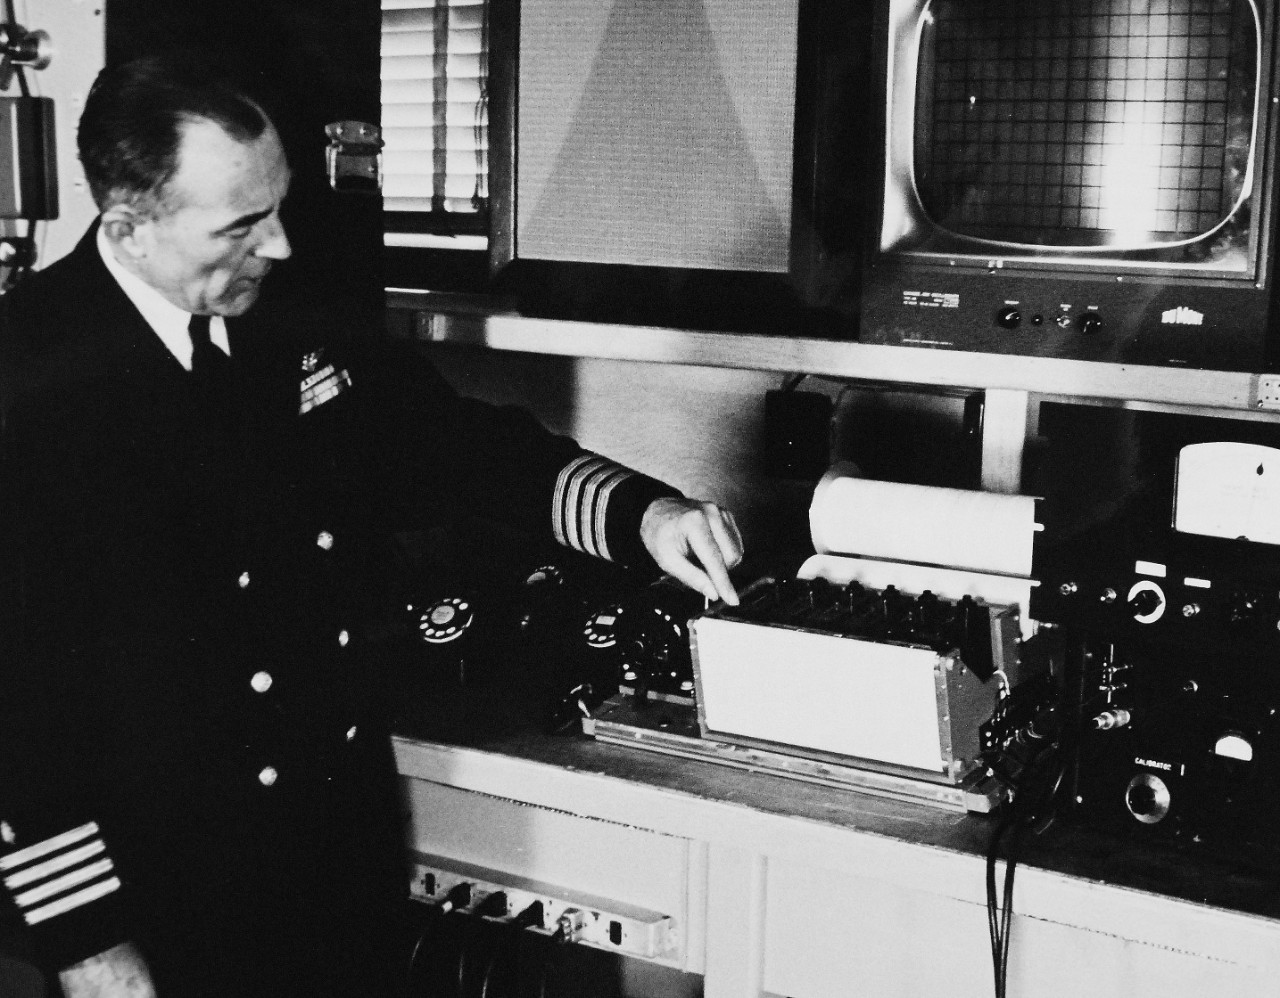 330-PS-8850-7:  U.S. Navy Conducts Physical Studies By Telephone.  Captain Norman Lee Barr, MC, USN, examines an ink-writer that is used to record the physiological information transmitted over telephone lines, March 21, 1958.  Official Department of Defense photograph, now in the collection of the National Archives.   